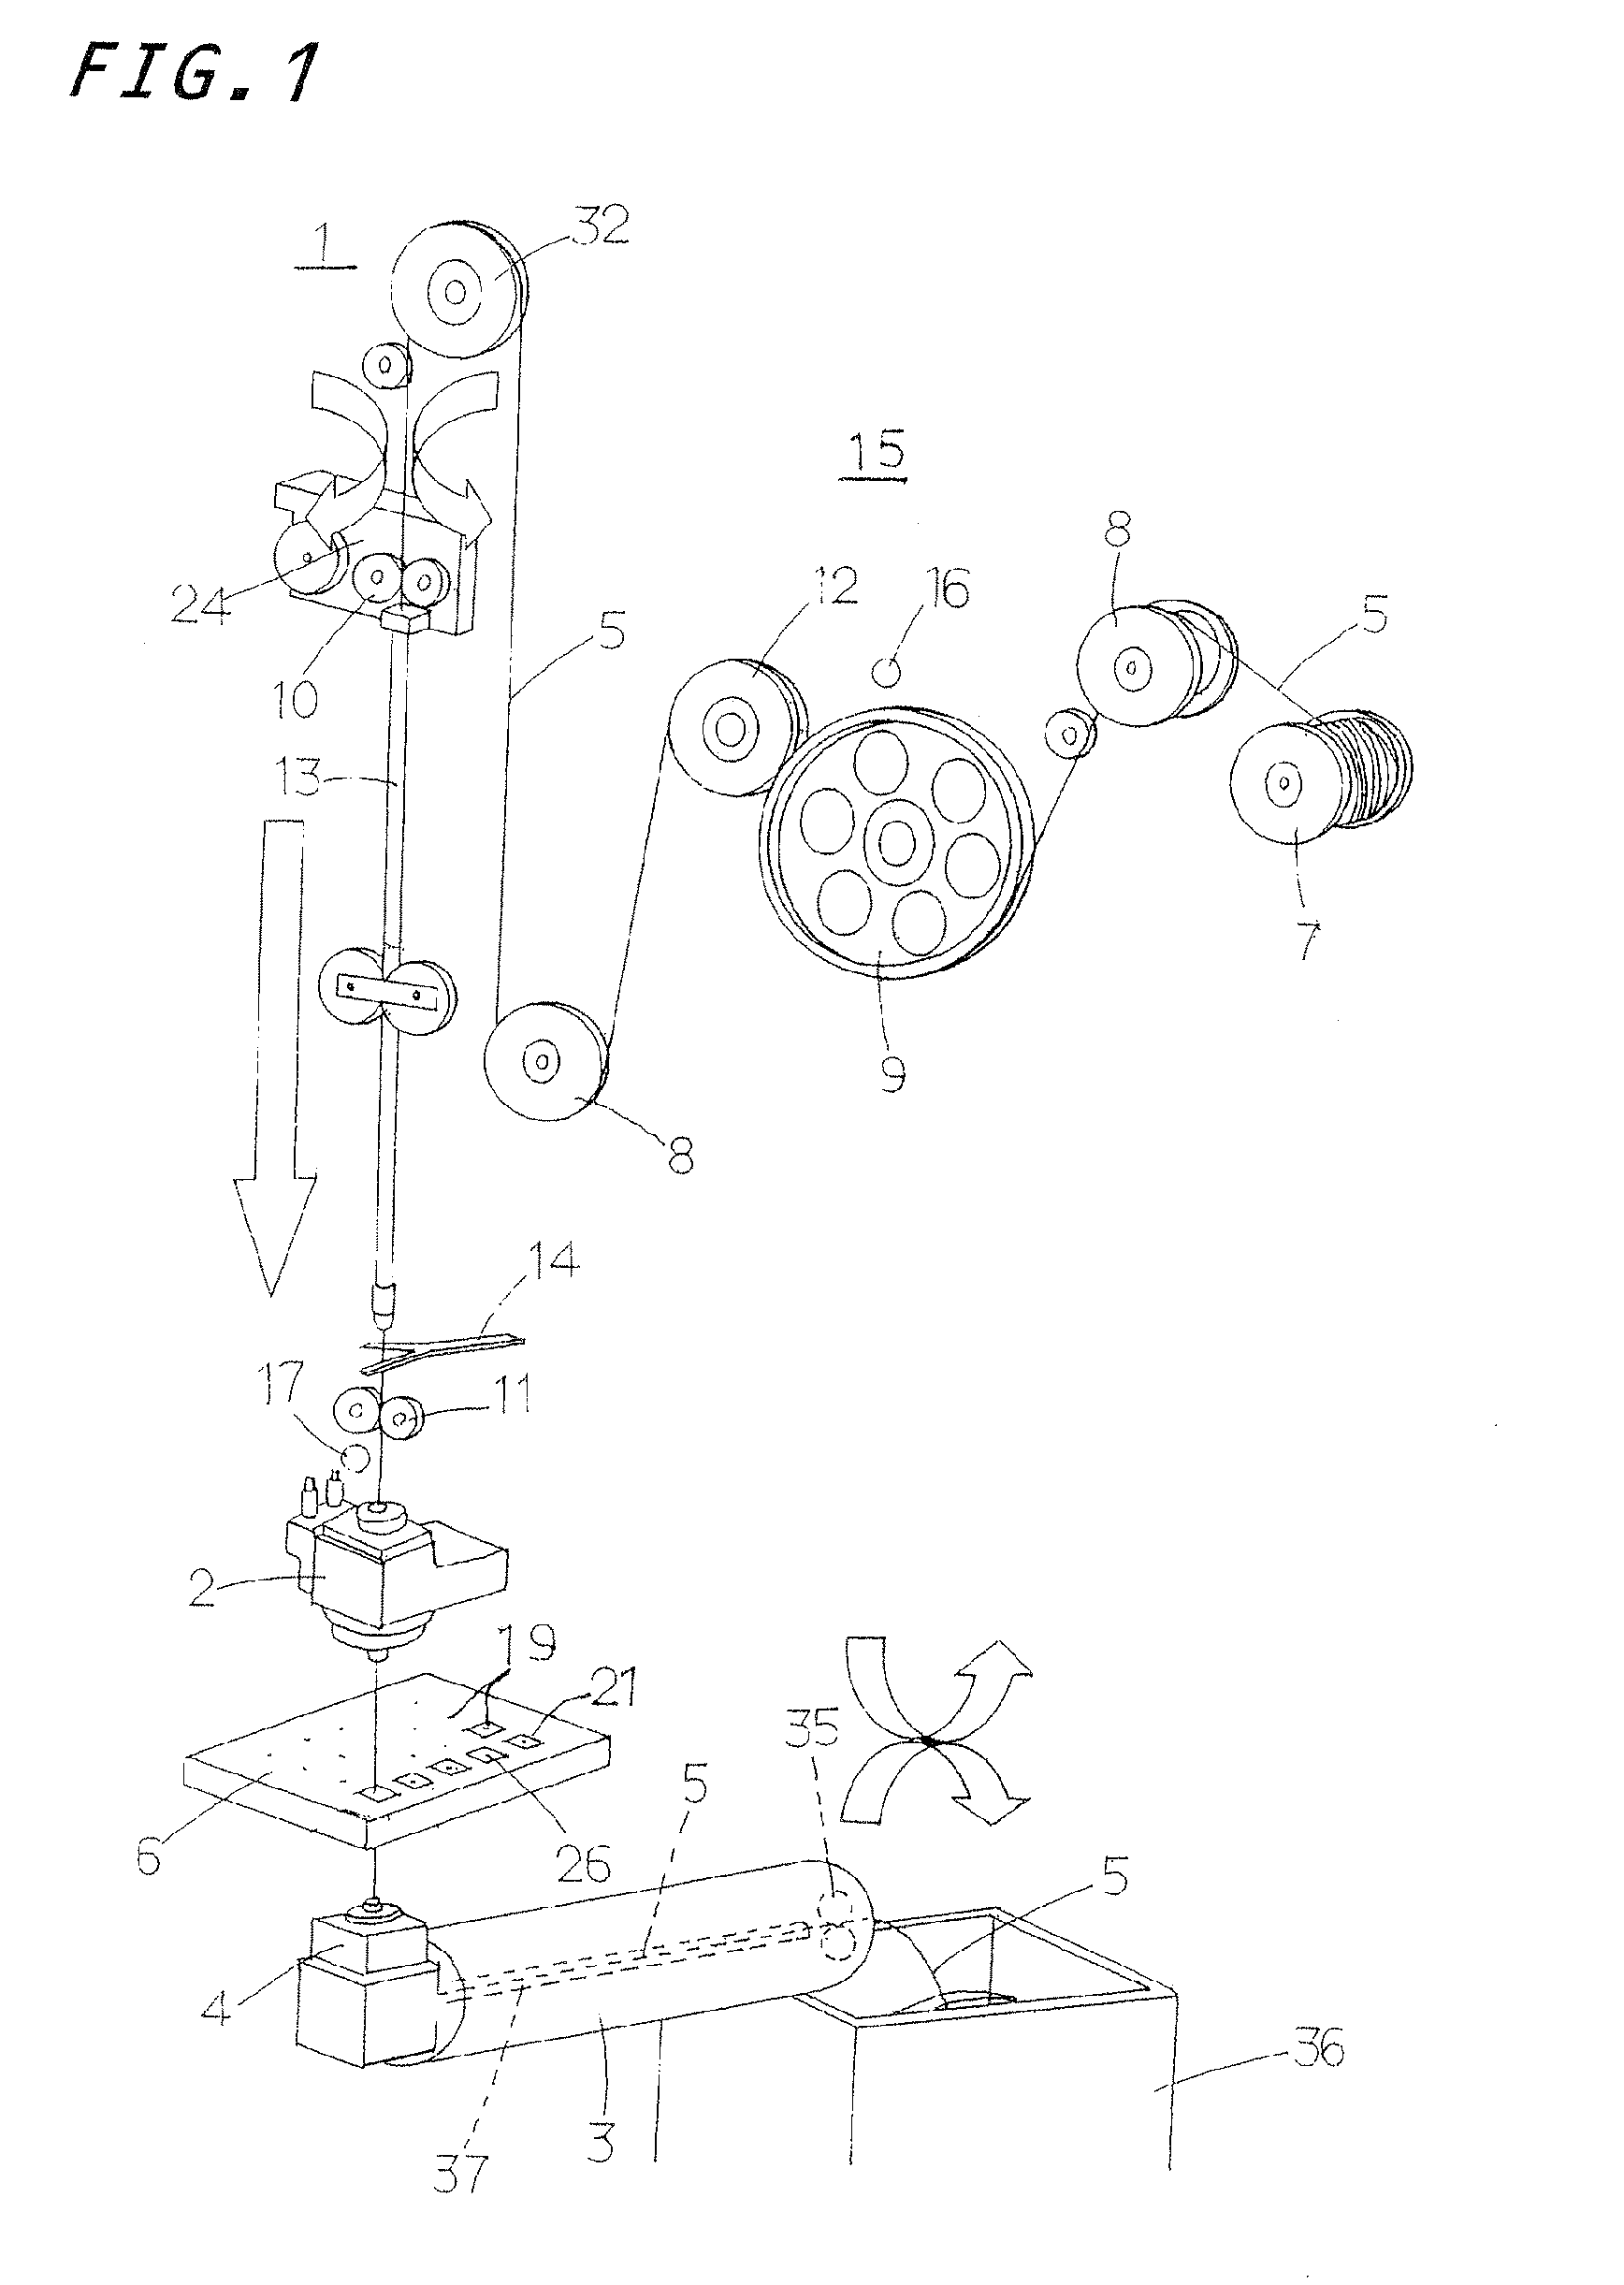 Method of cutting out part with making partially welded spots in wire-cut electrical discharge machining